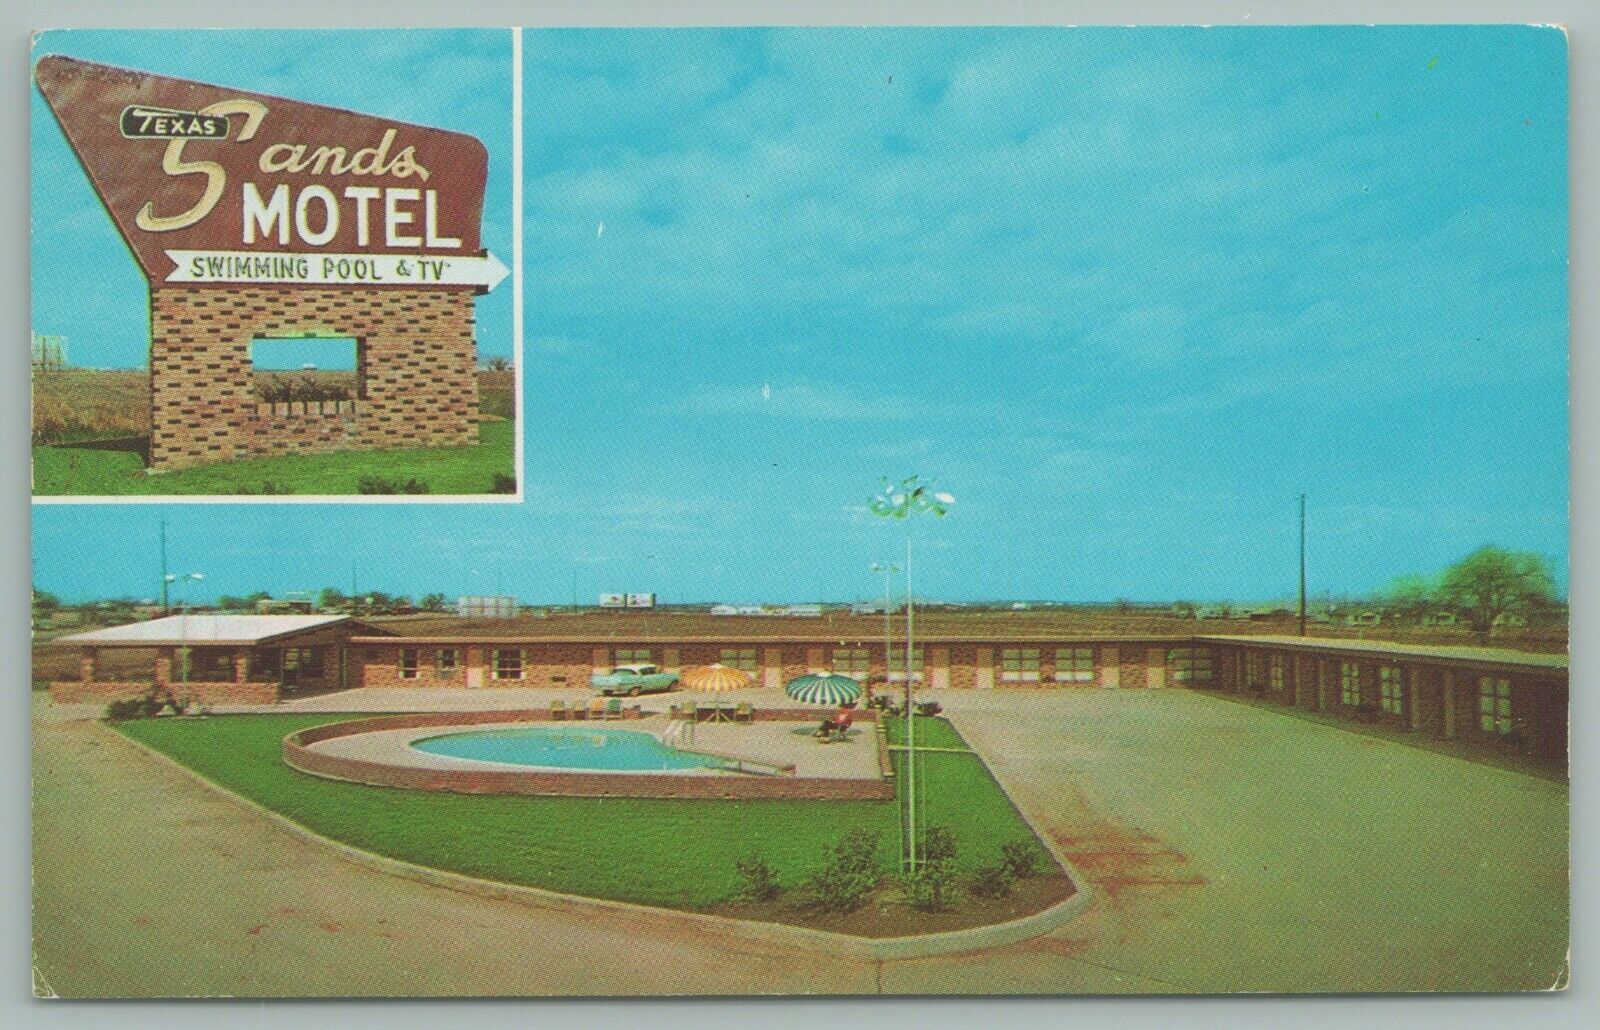 Gainesville Texas~Texas Sands Motel~US Hwy 77N~Swimming Pool~50s Car~1960s